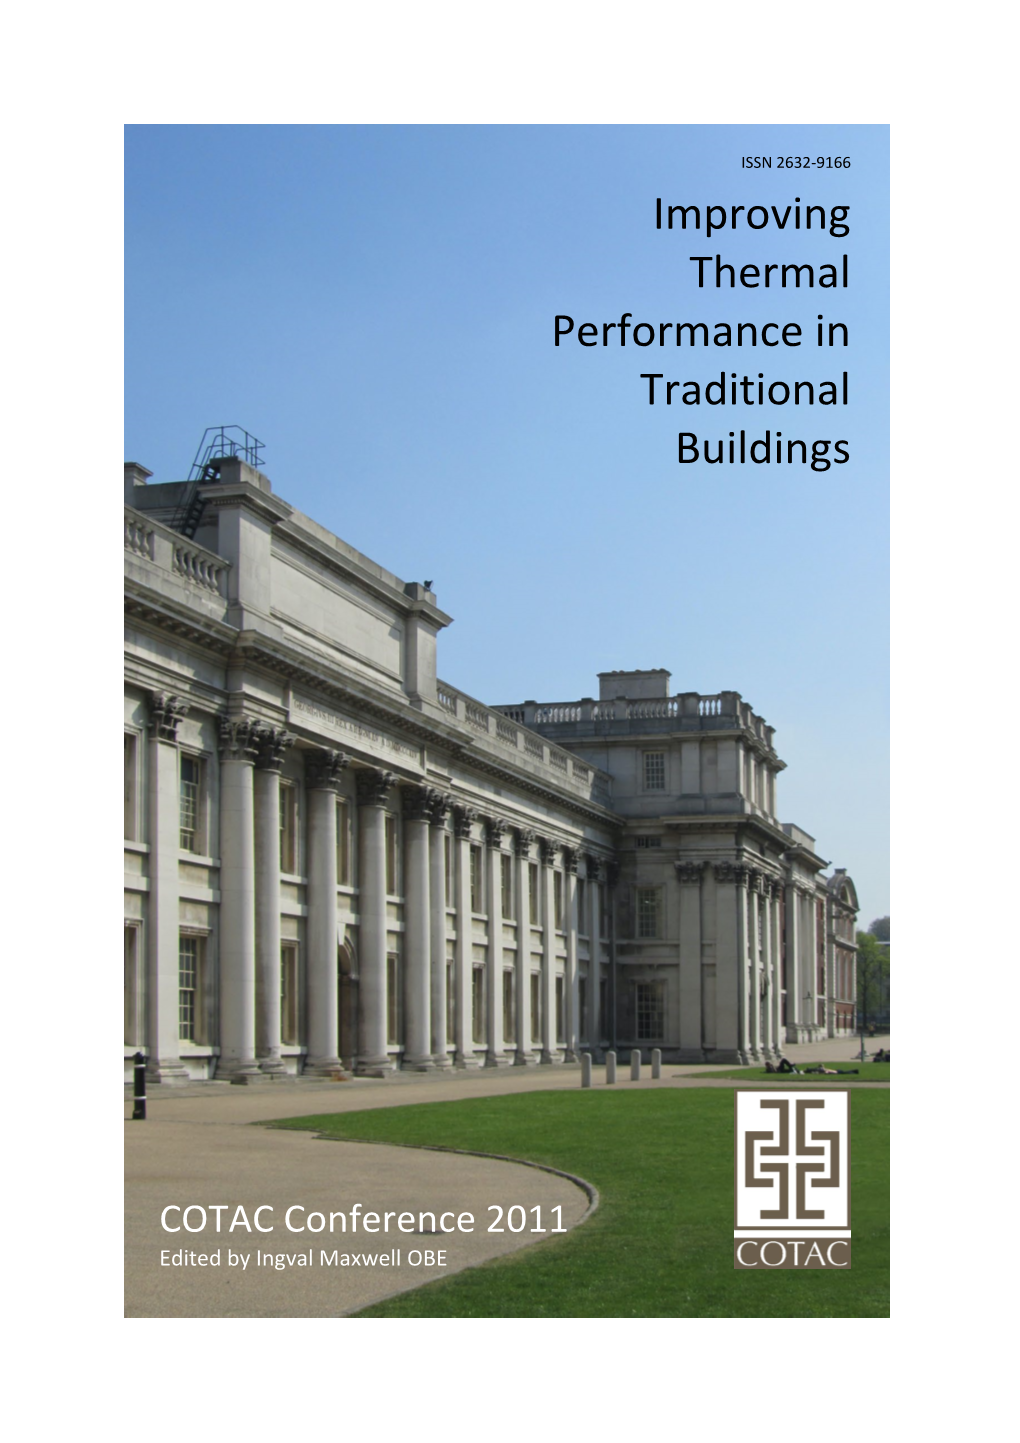 Improving Thermal Performance in Traditional Buildings